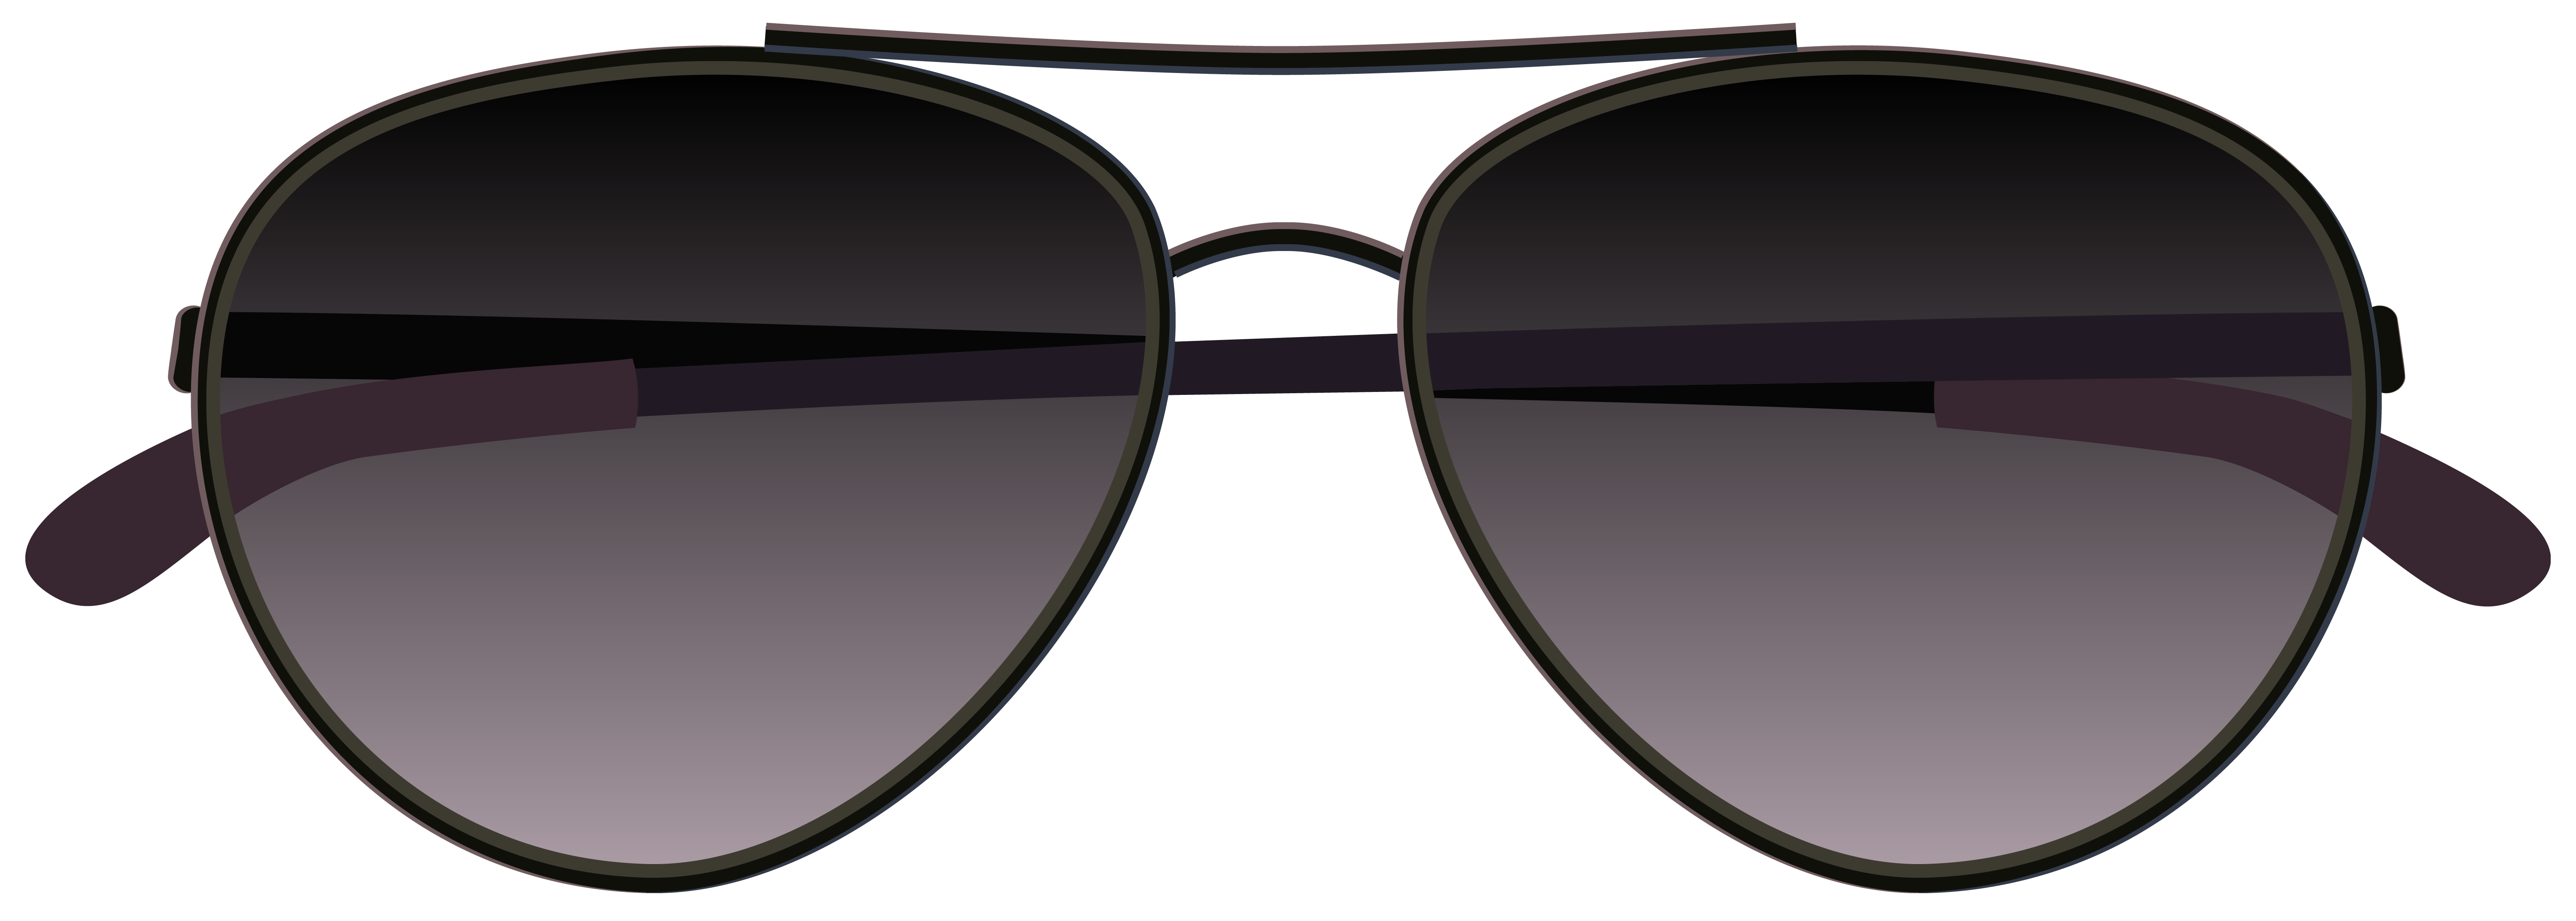 Sunglasses Aviator Download HQ PNG Clipart